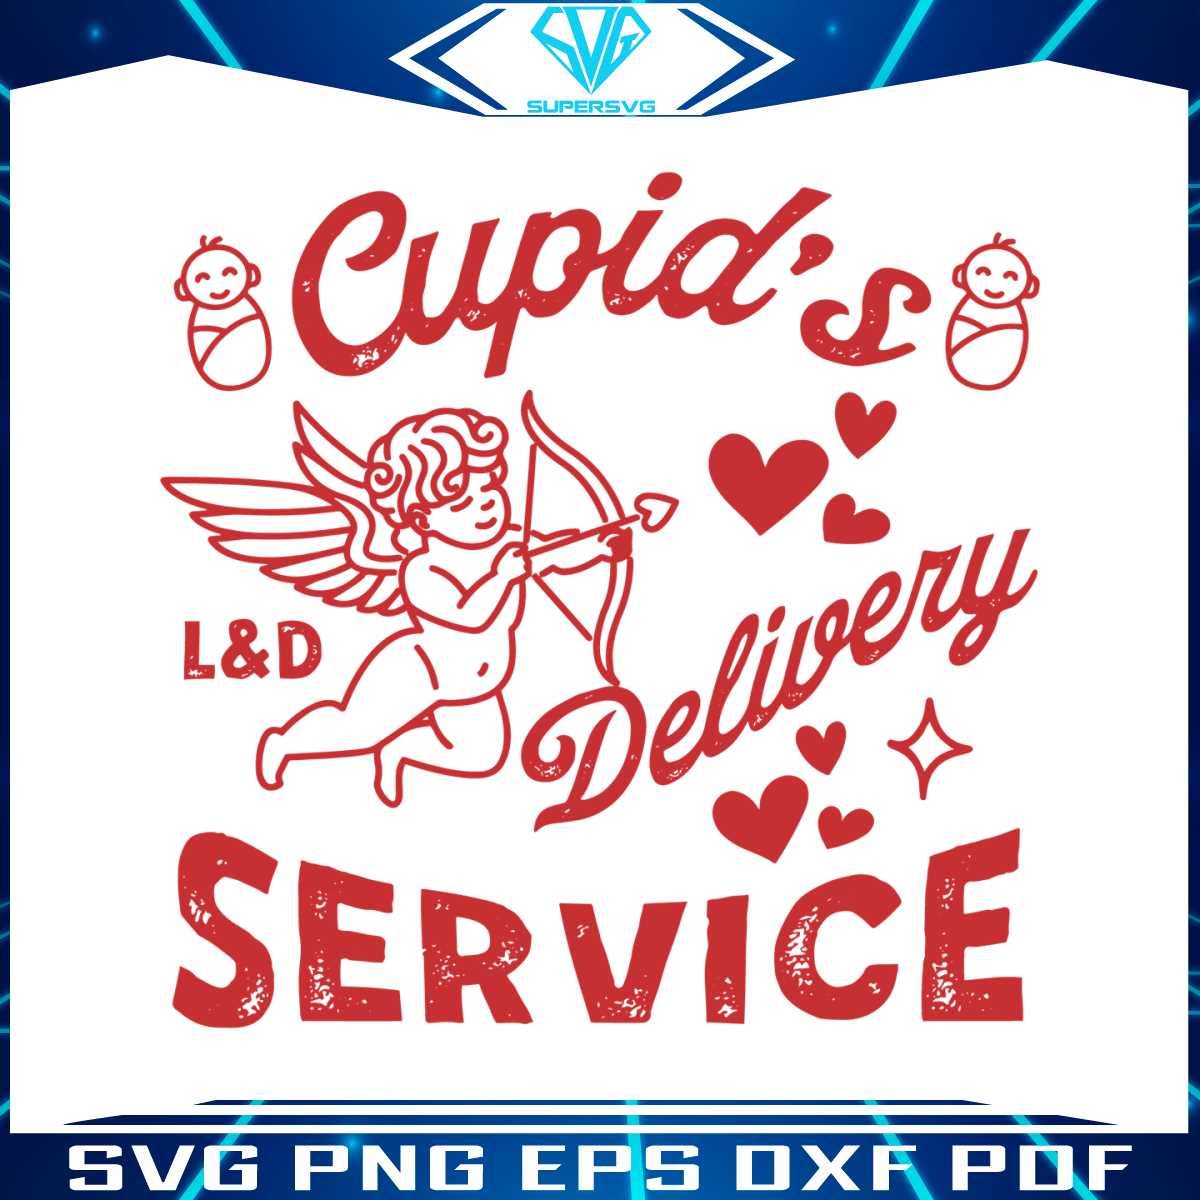 cupids-delivery-service-rn-aide-tech-svg